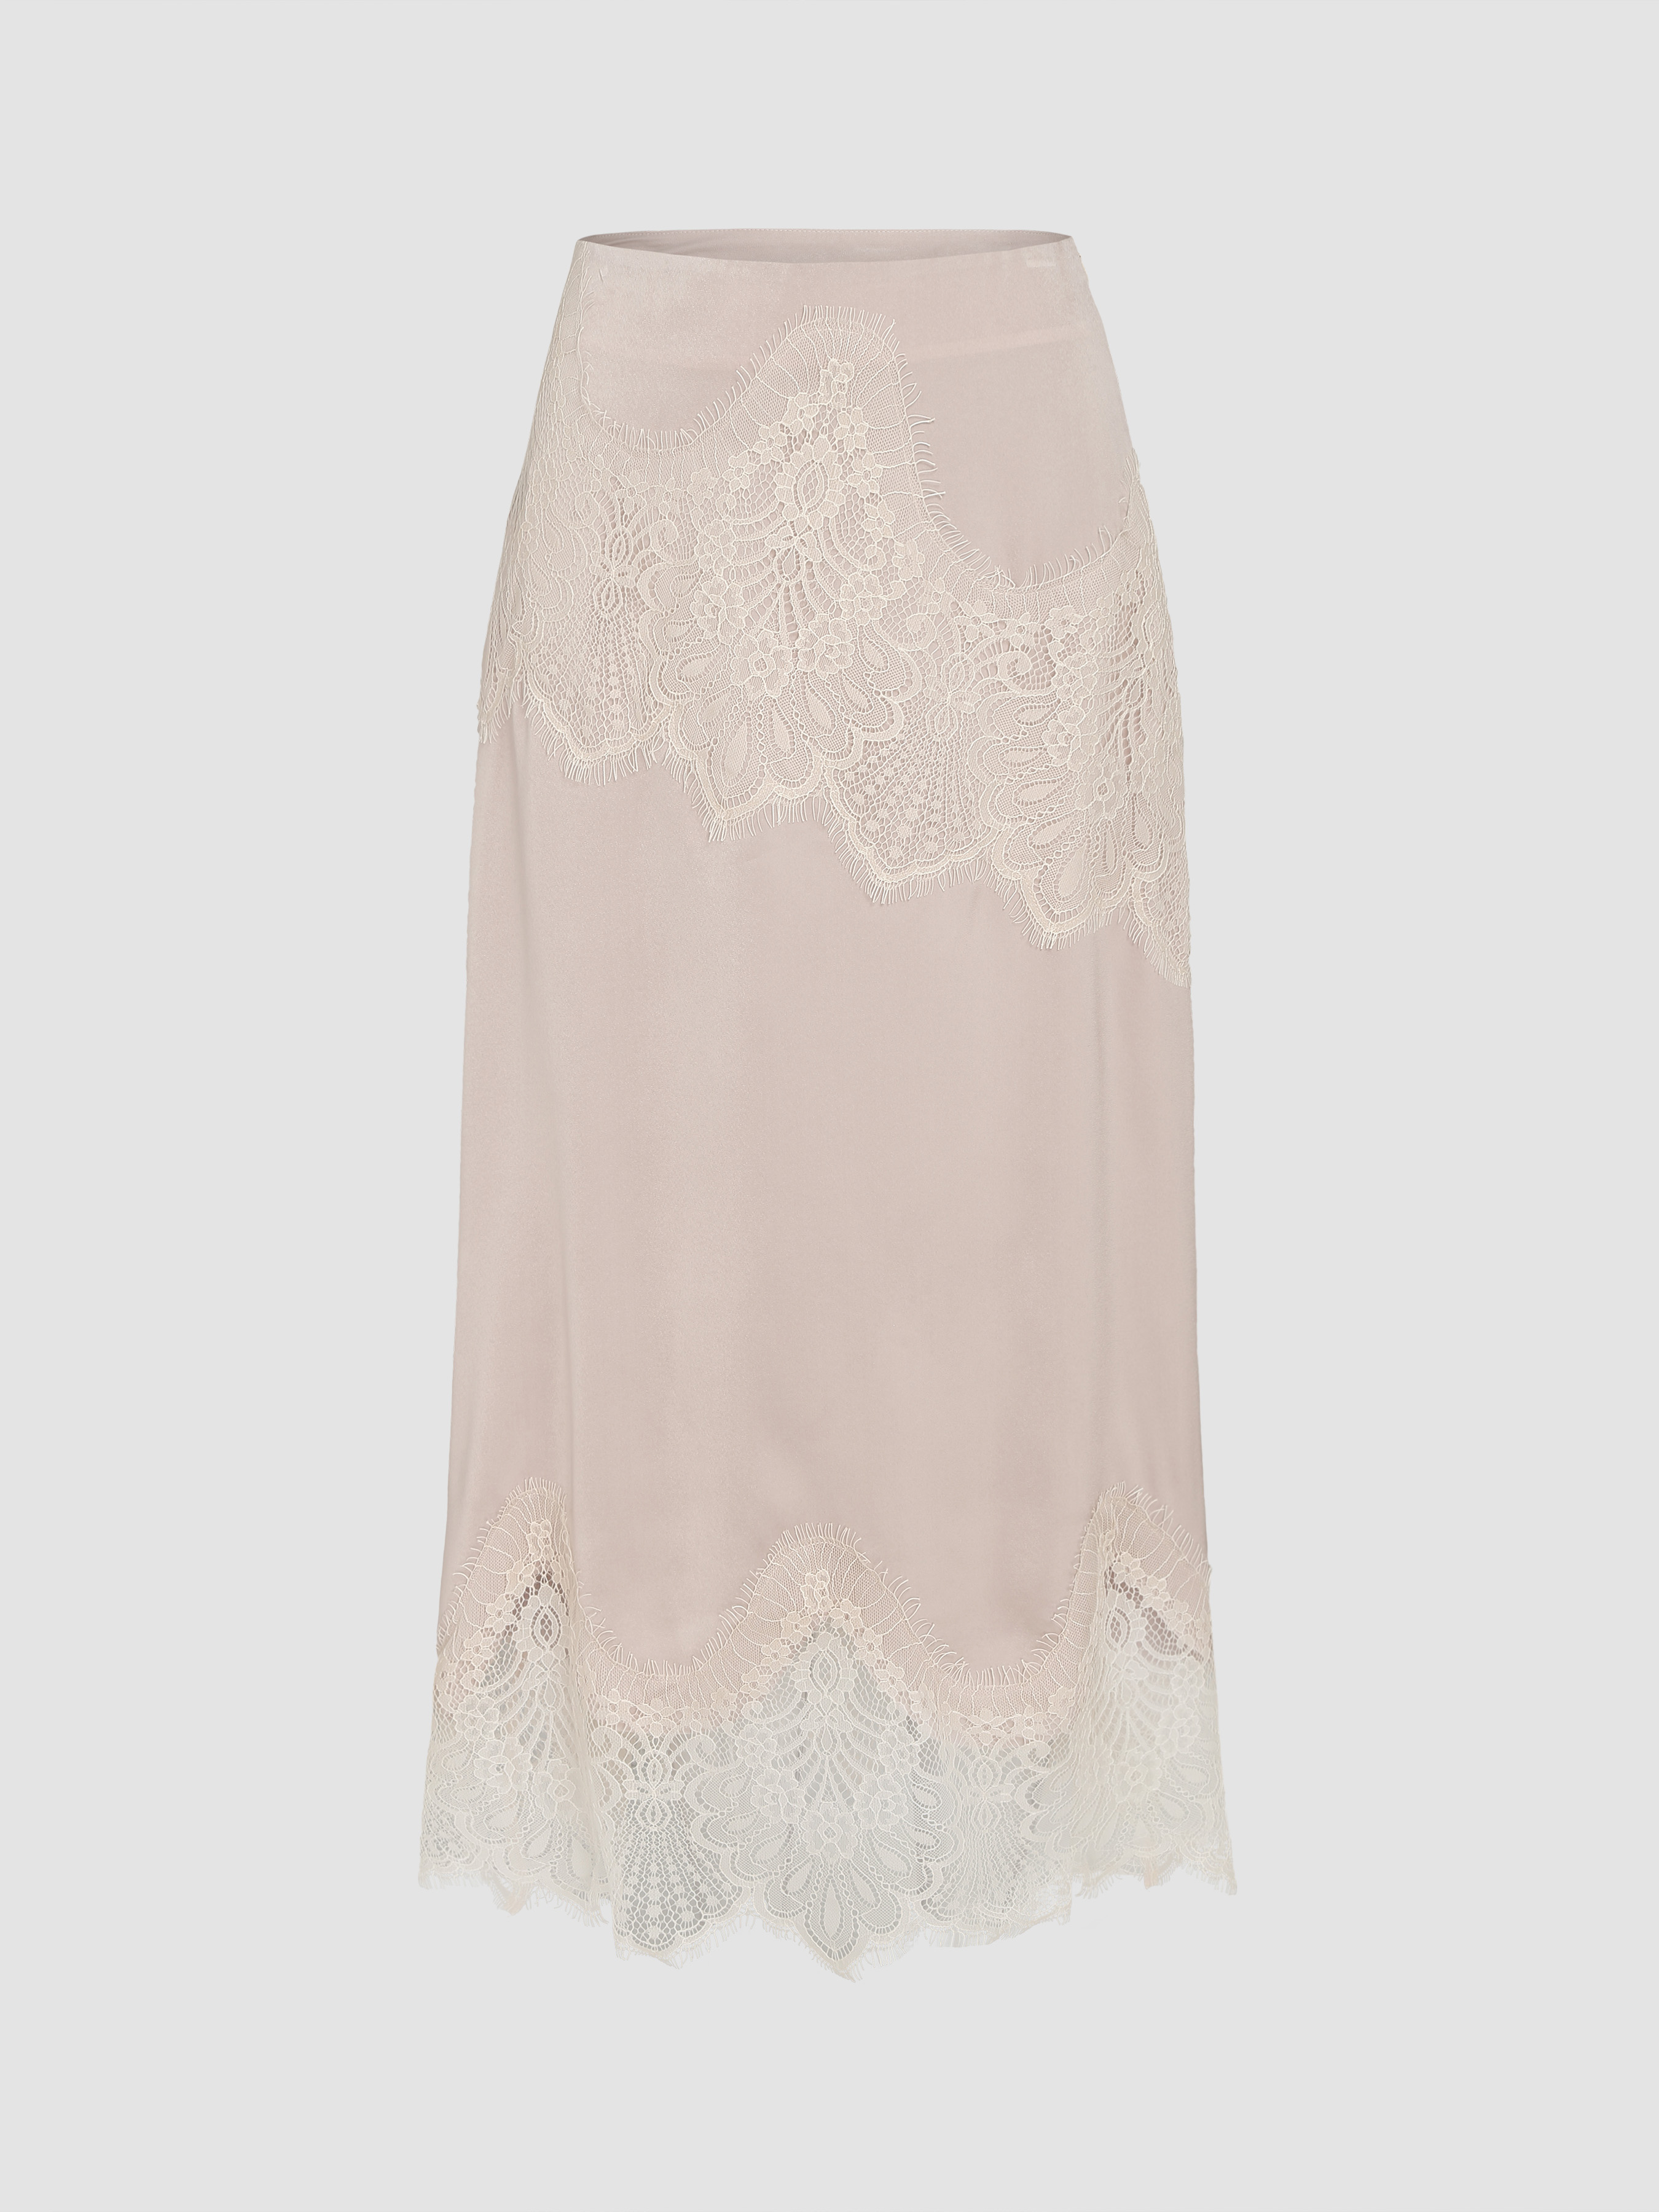 Satin Lace Long Skirt For Date Vacation Holiday